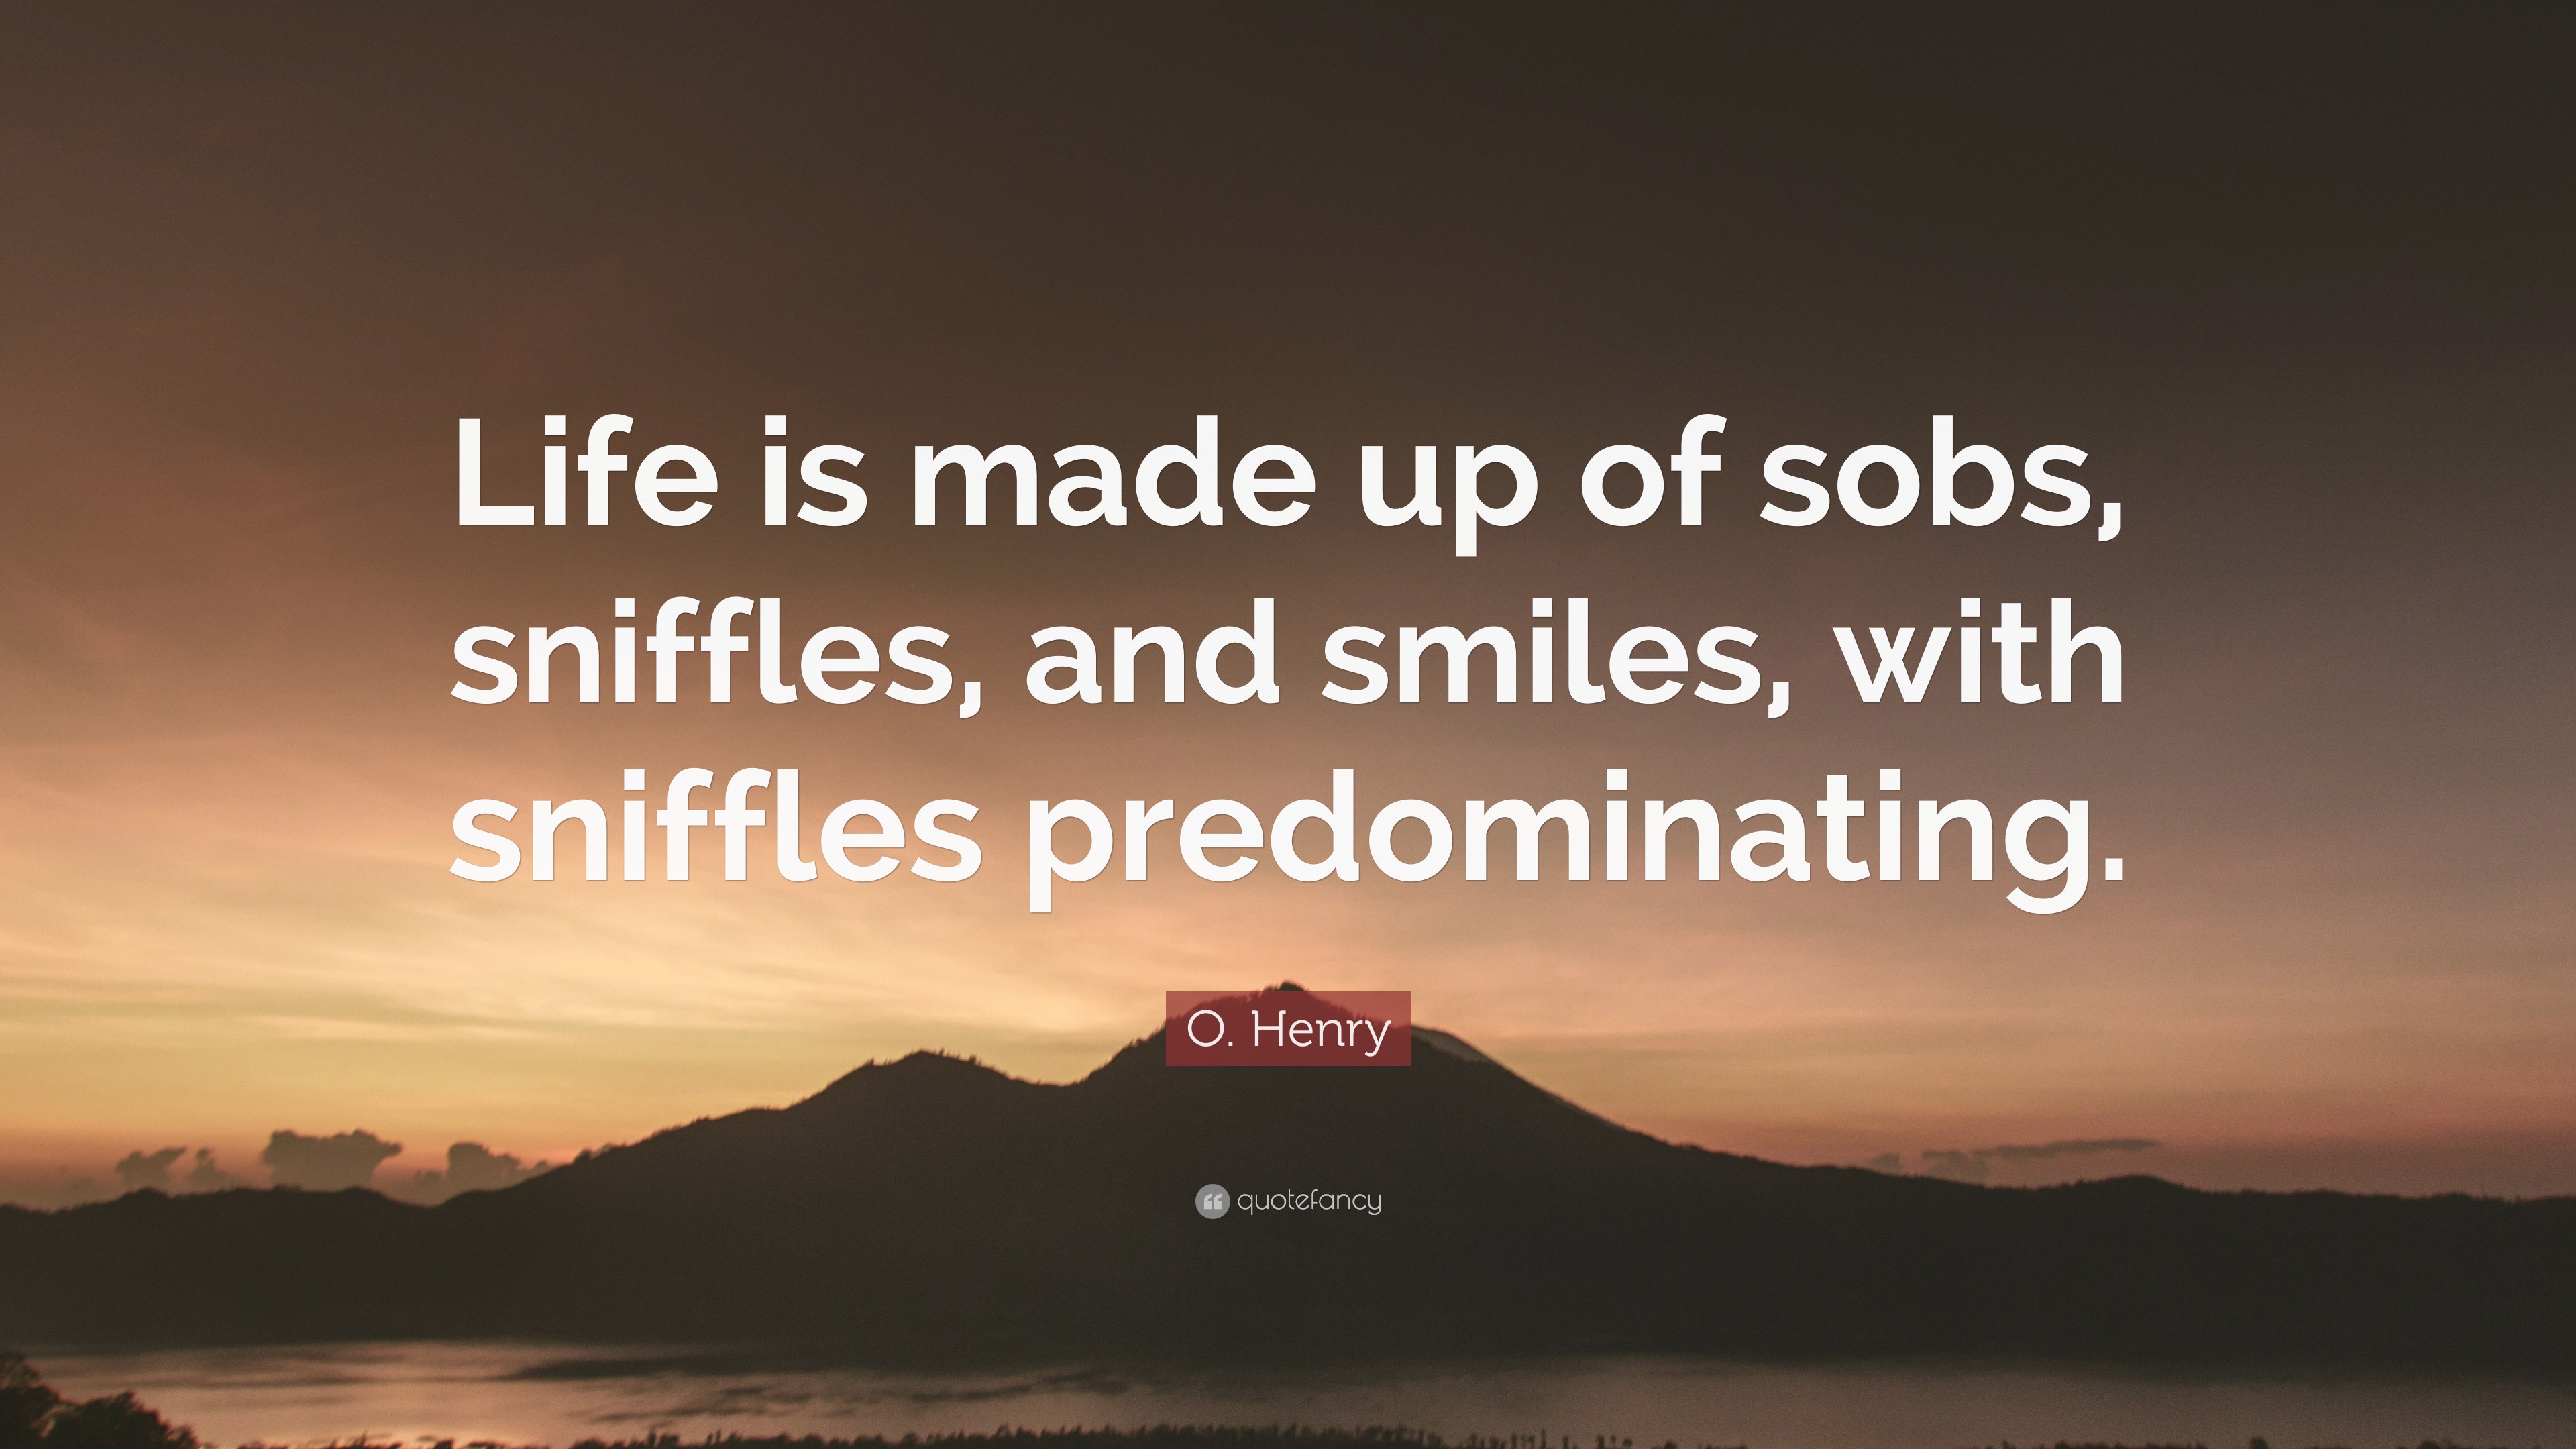 O Henry Quote Life Is Made Up Of Sobs Sniffles And Smiles With Sniffles Predominating